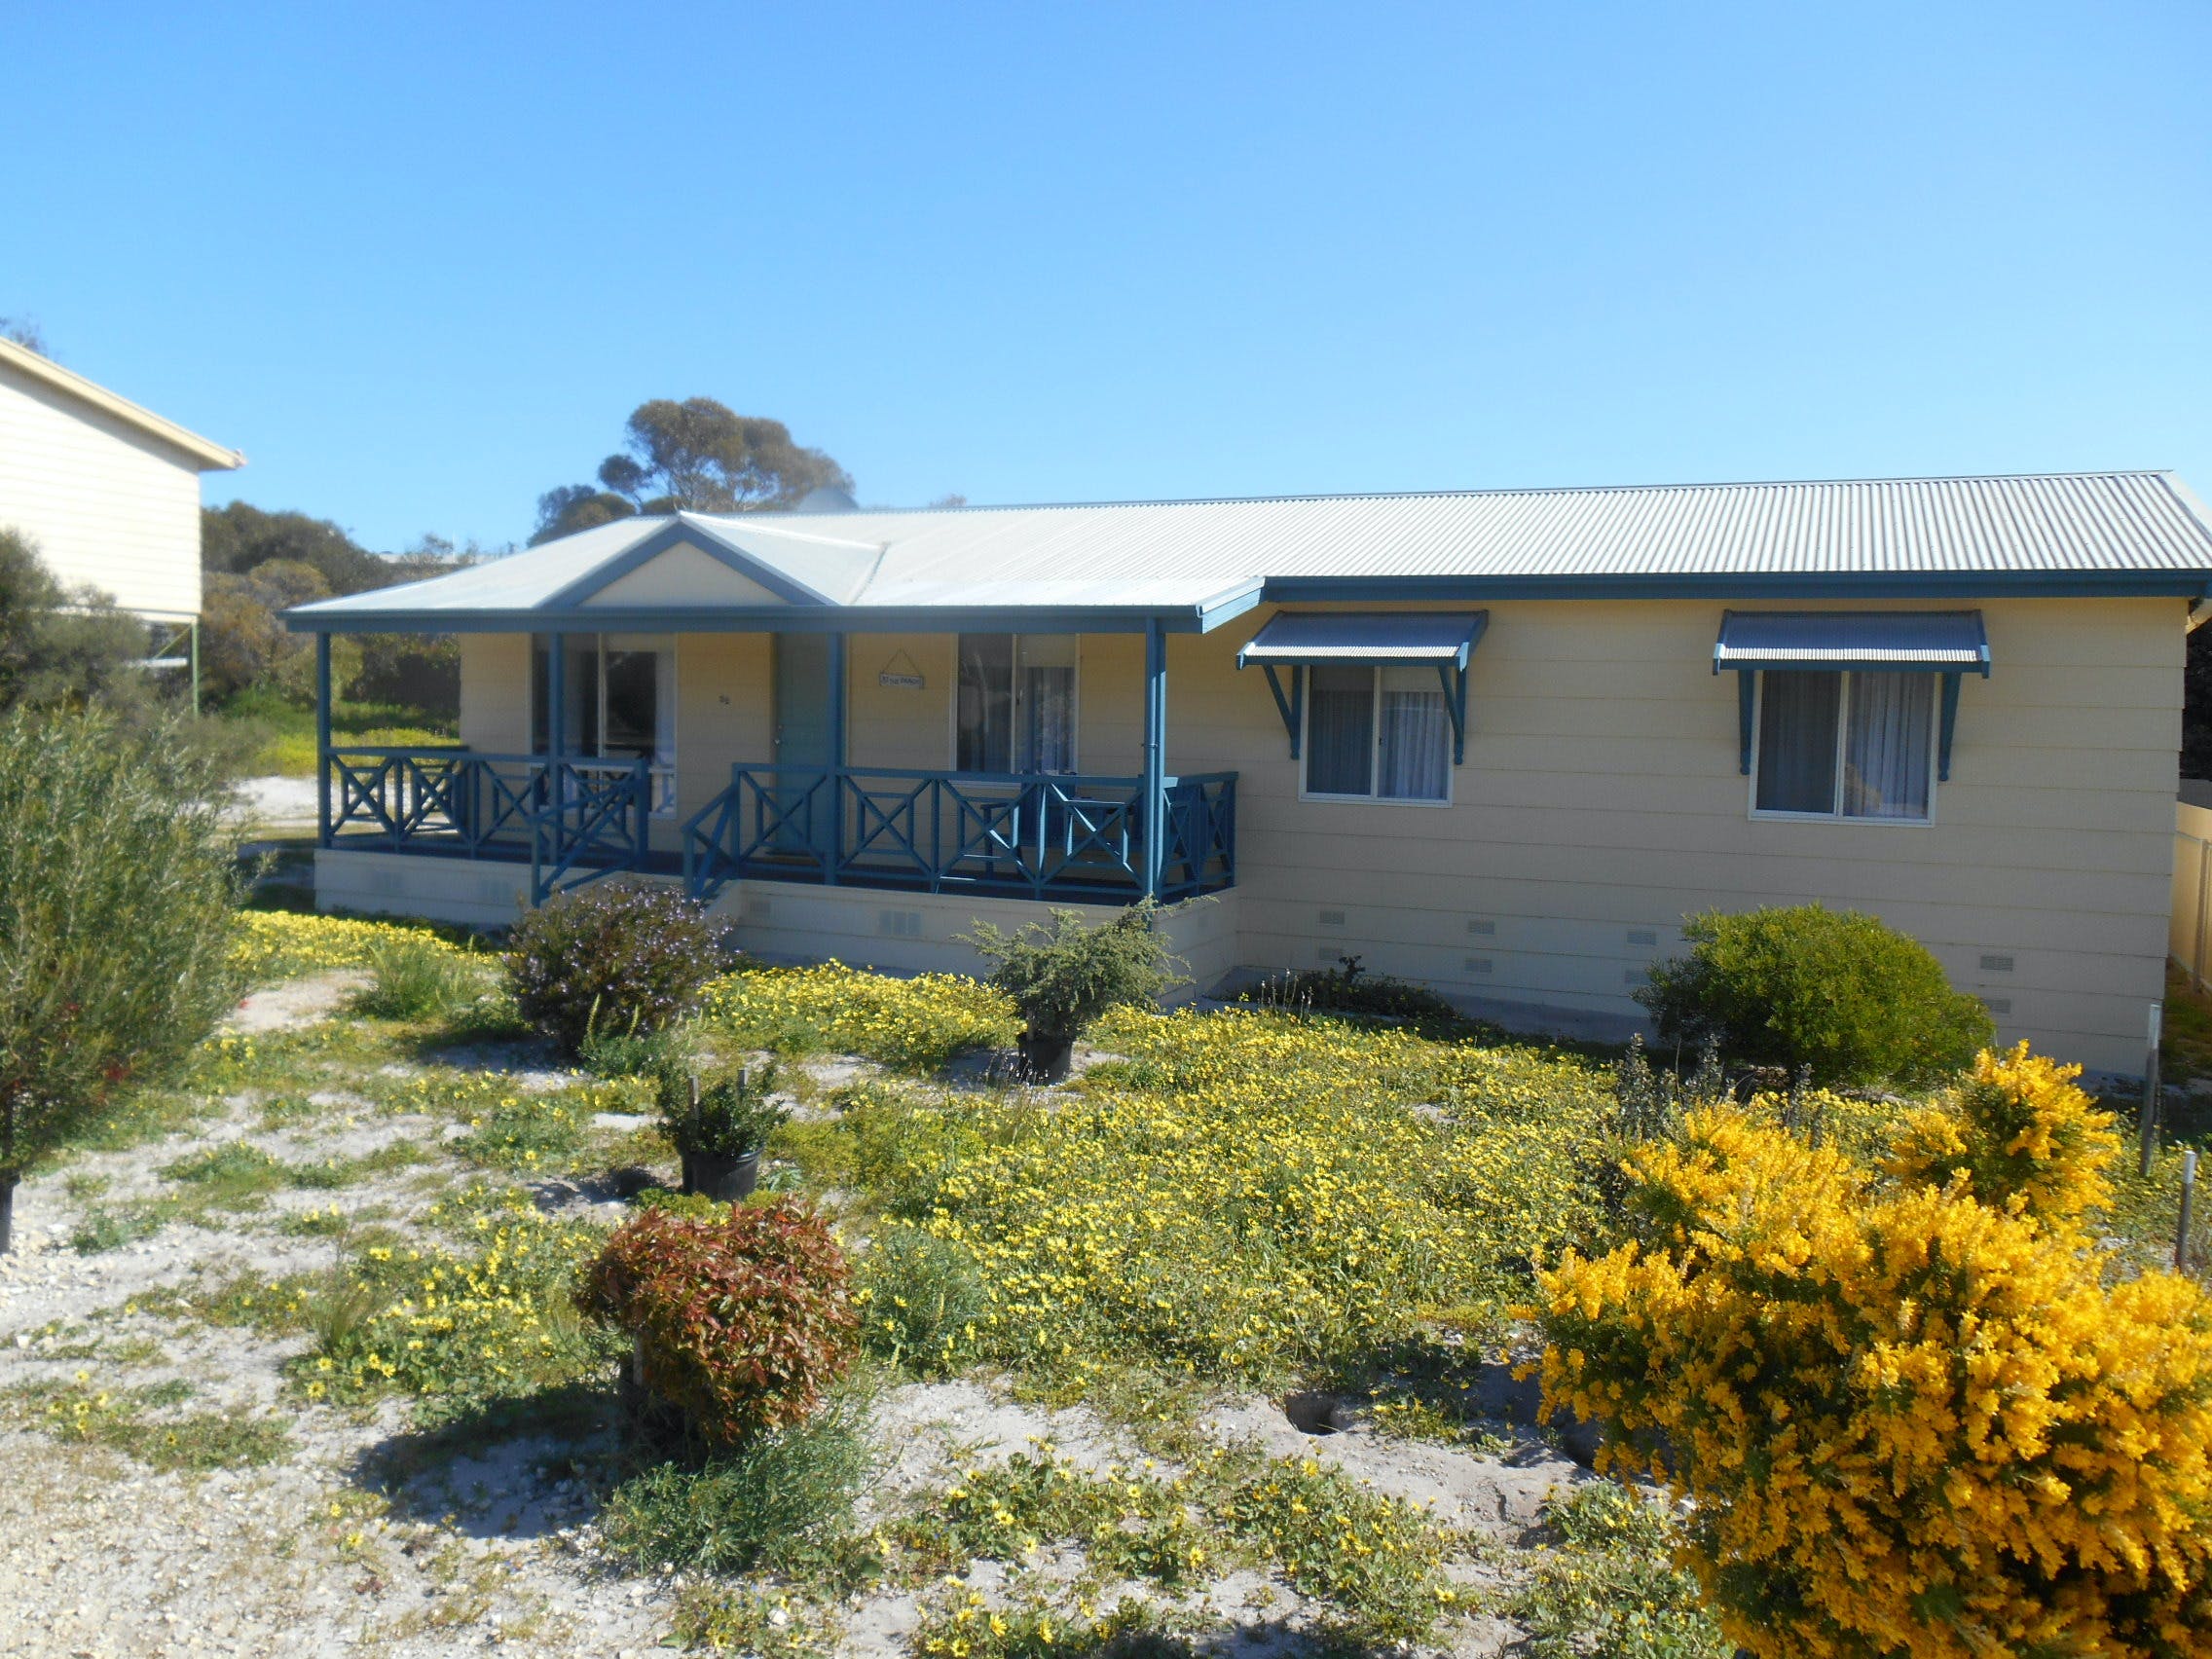 At the Beach - Dalby Accommodation